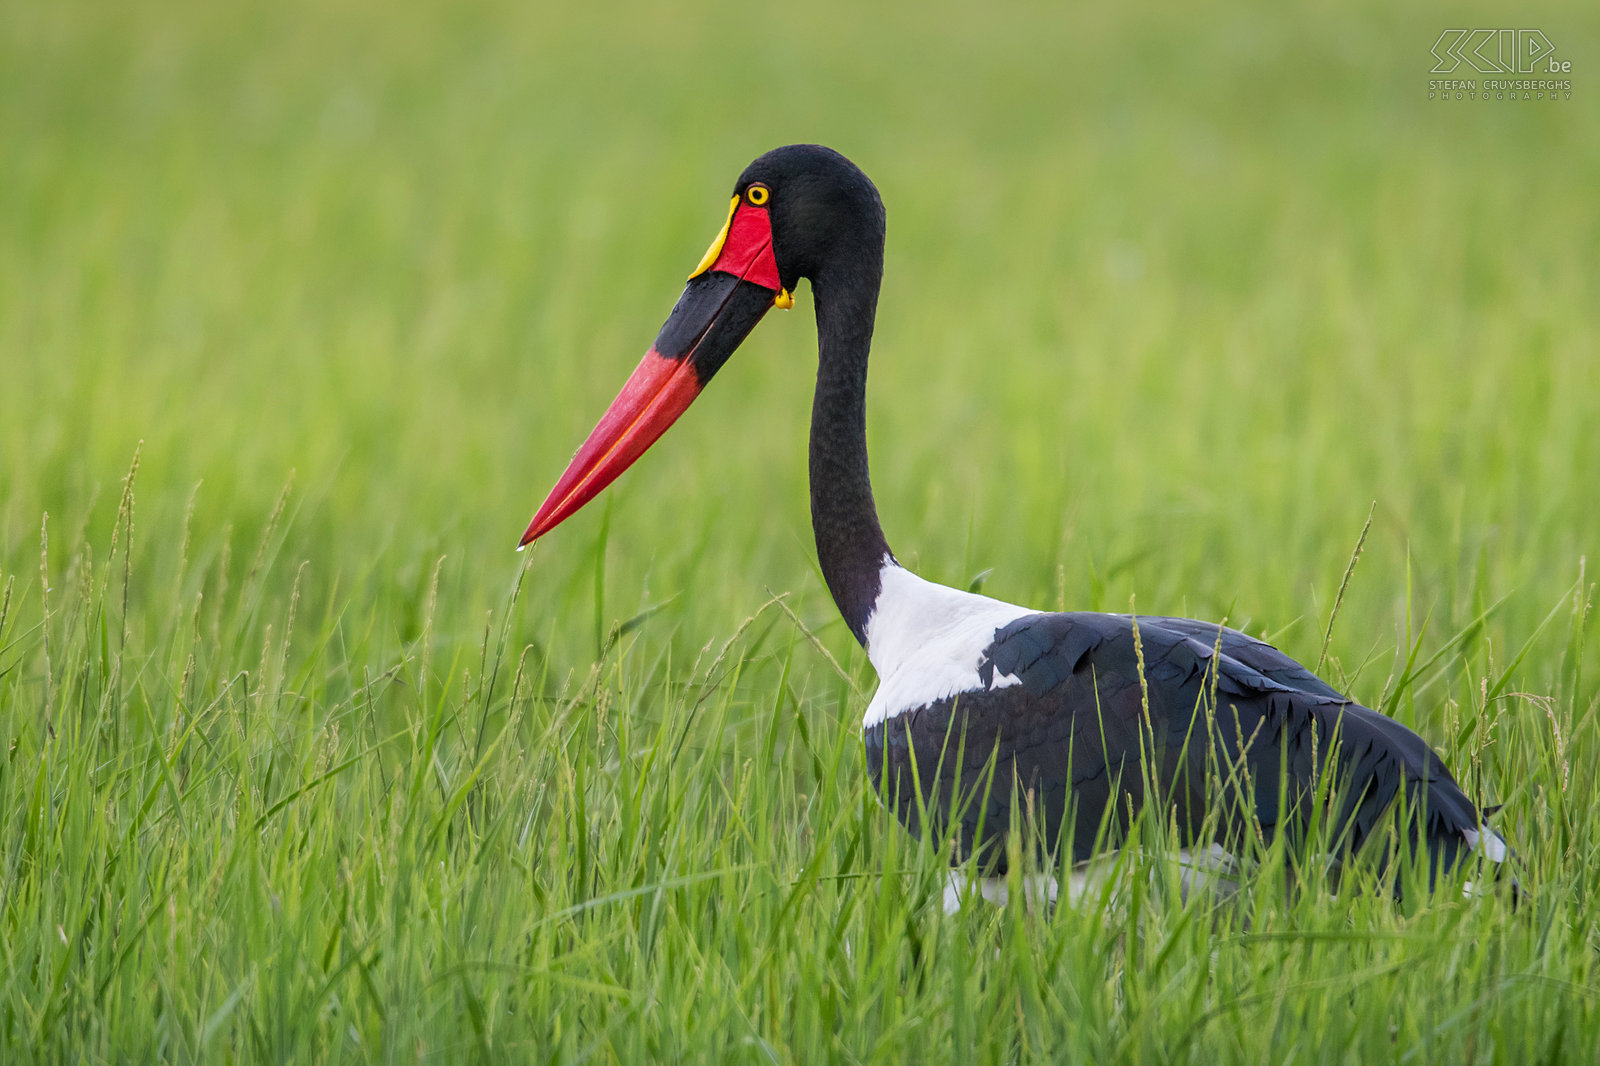 Lake Awassa - Saddle-billed stork A saddle-billed stork (Ephippiorhynchus senegalensis) is a beautiful and large stork with a massive bill that is red with a black band and a yellow frontal shield (the 'saddle').  Stefan Cruysberghs